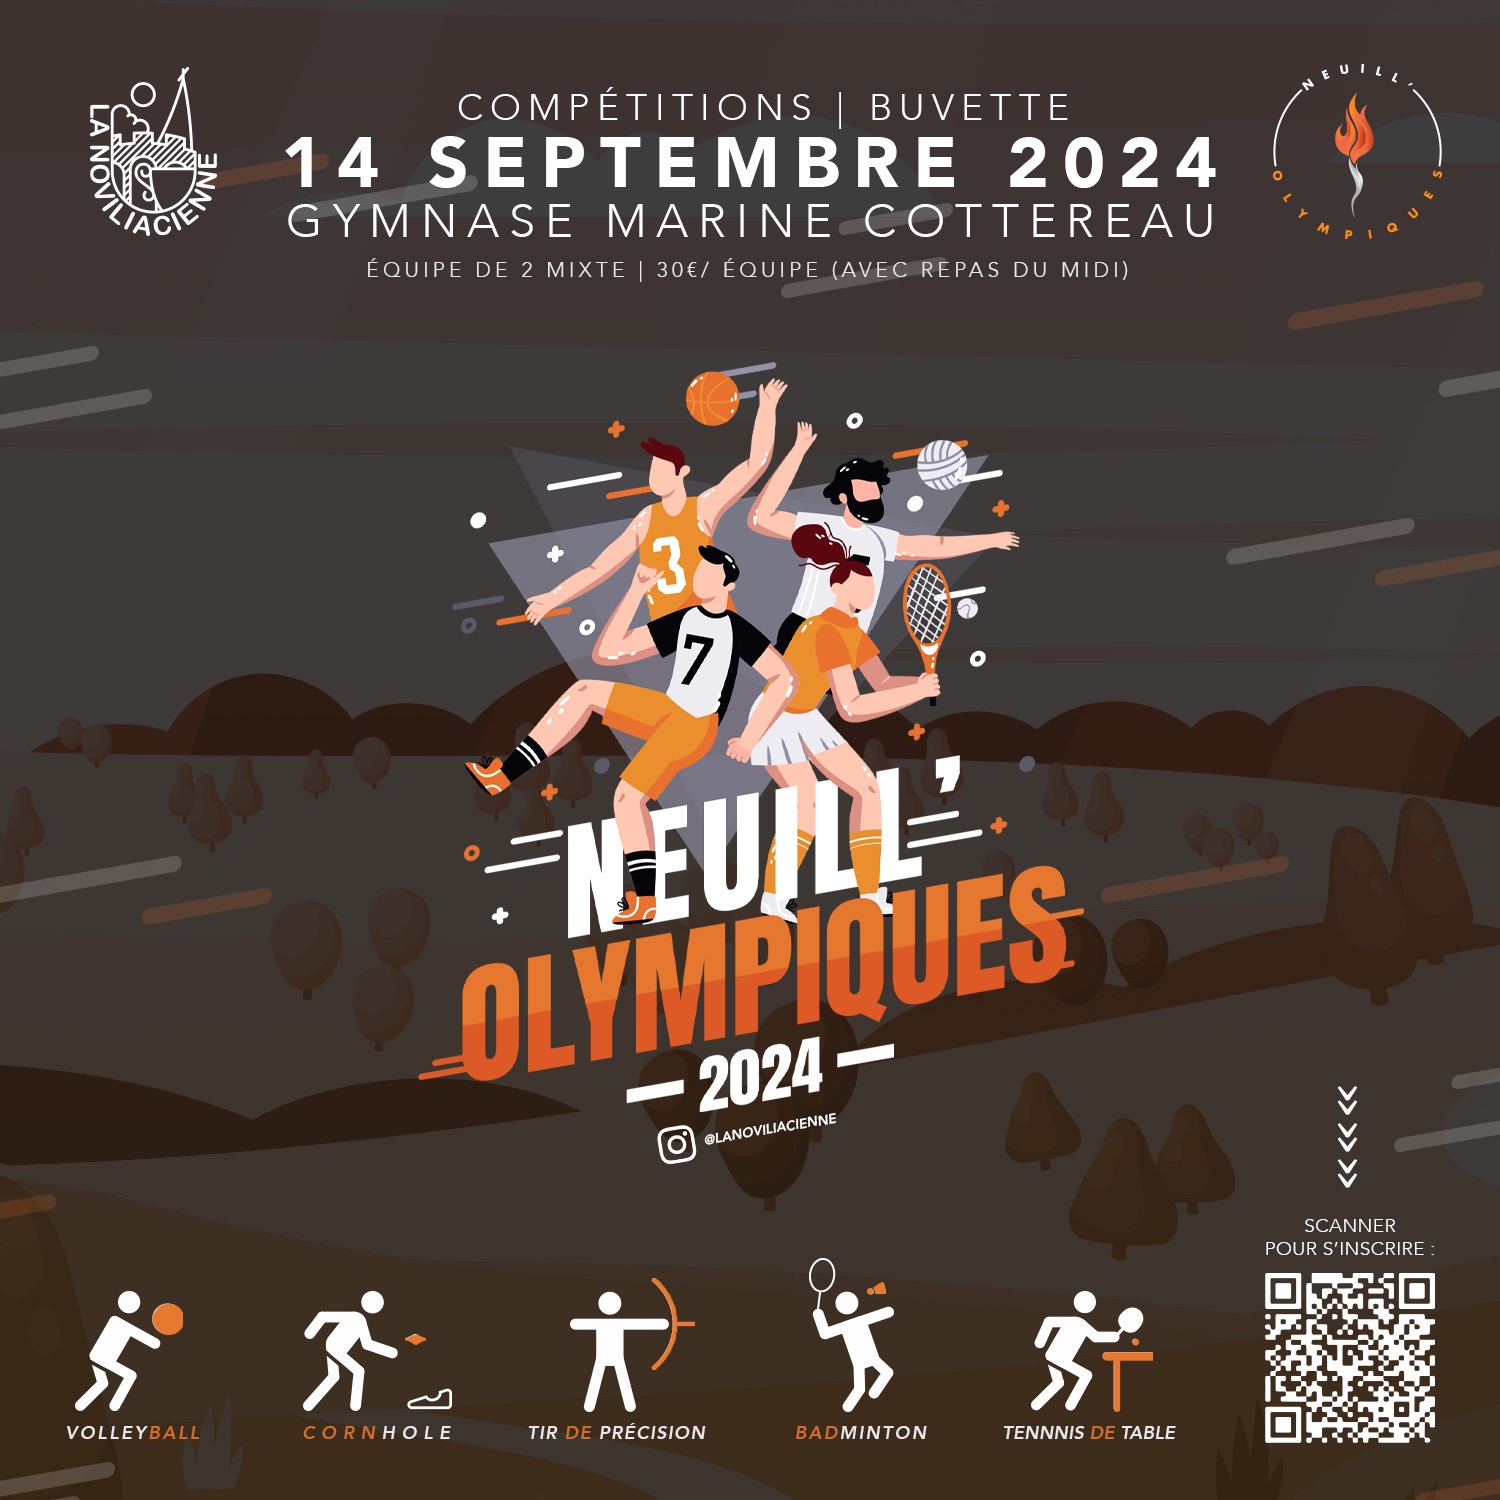 NEUILL' OLYMPIQUES 2024